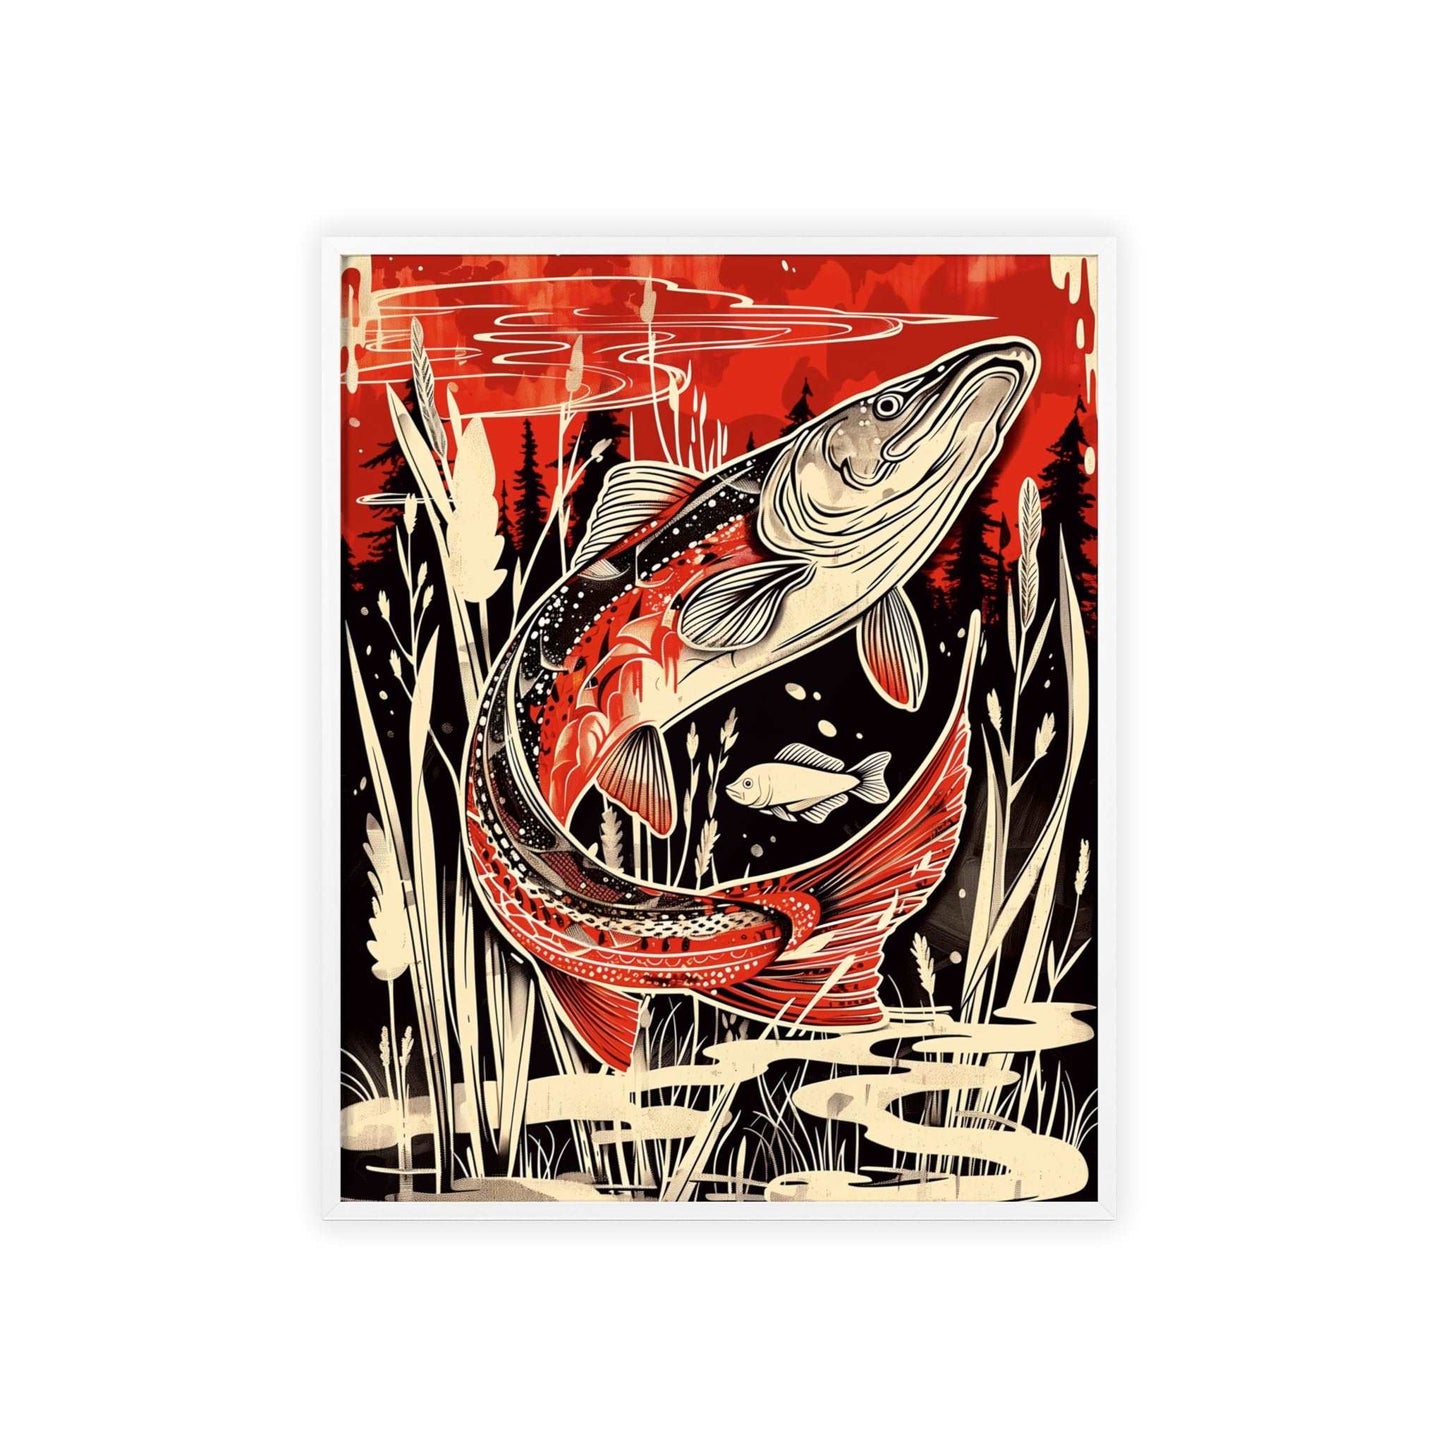 This original wall art, featuring a striking portrayal of the pike fish, adds a touch of edgy elegance to your modern home decor